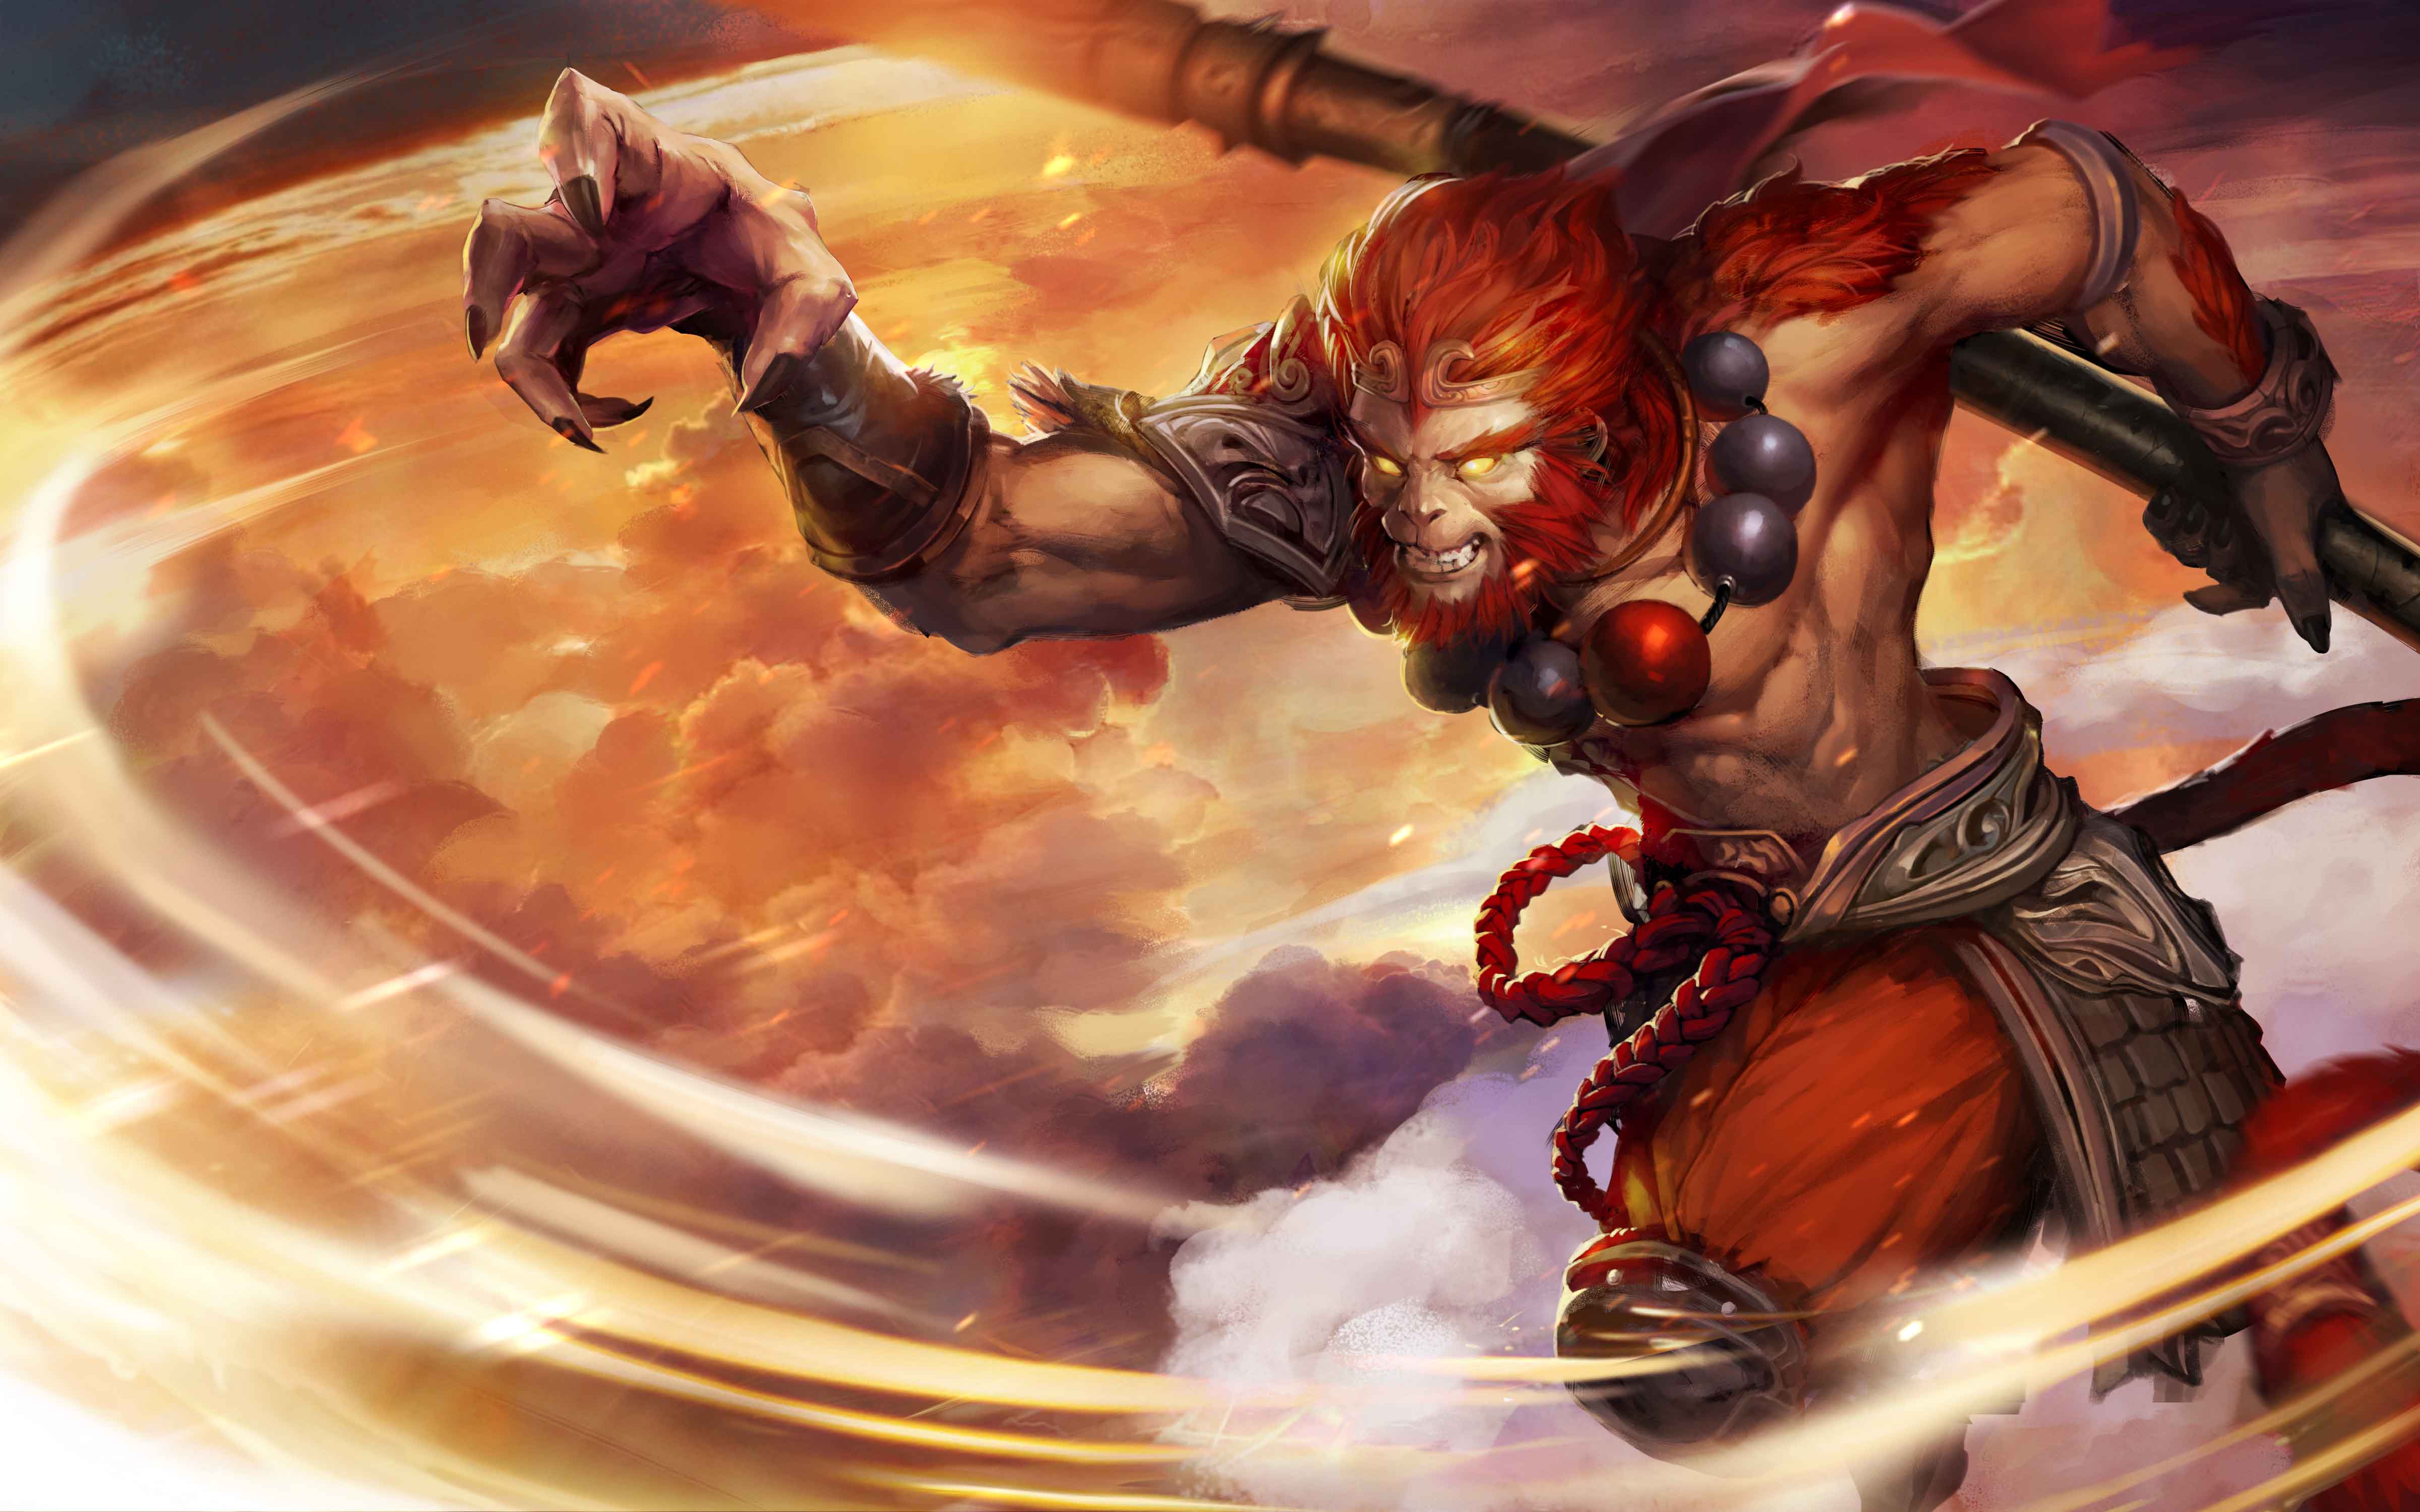 wukong monkey king dota phantom sun lancer pc mobile tablet wallpapers heroes macaque wallpapers13 disney journey west legends drawing fan